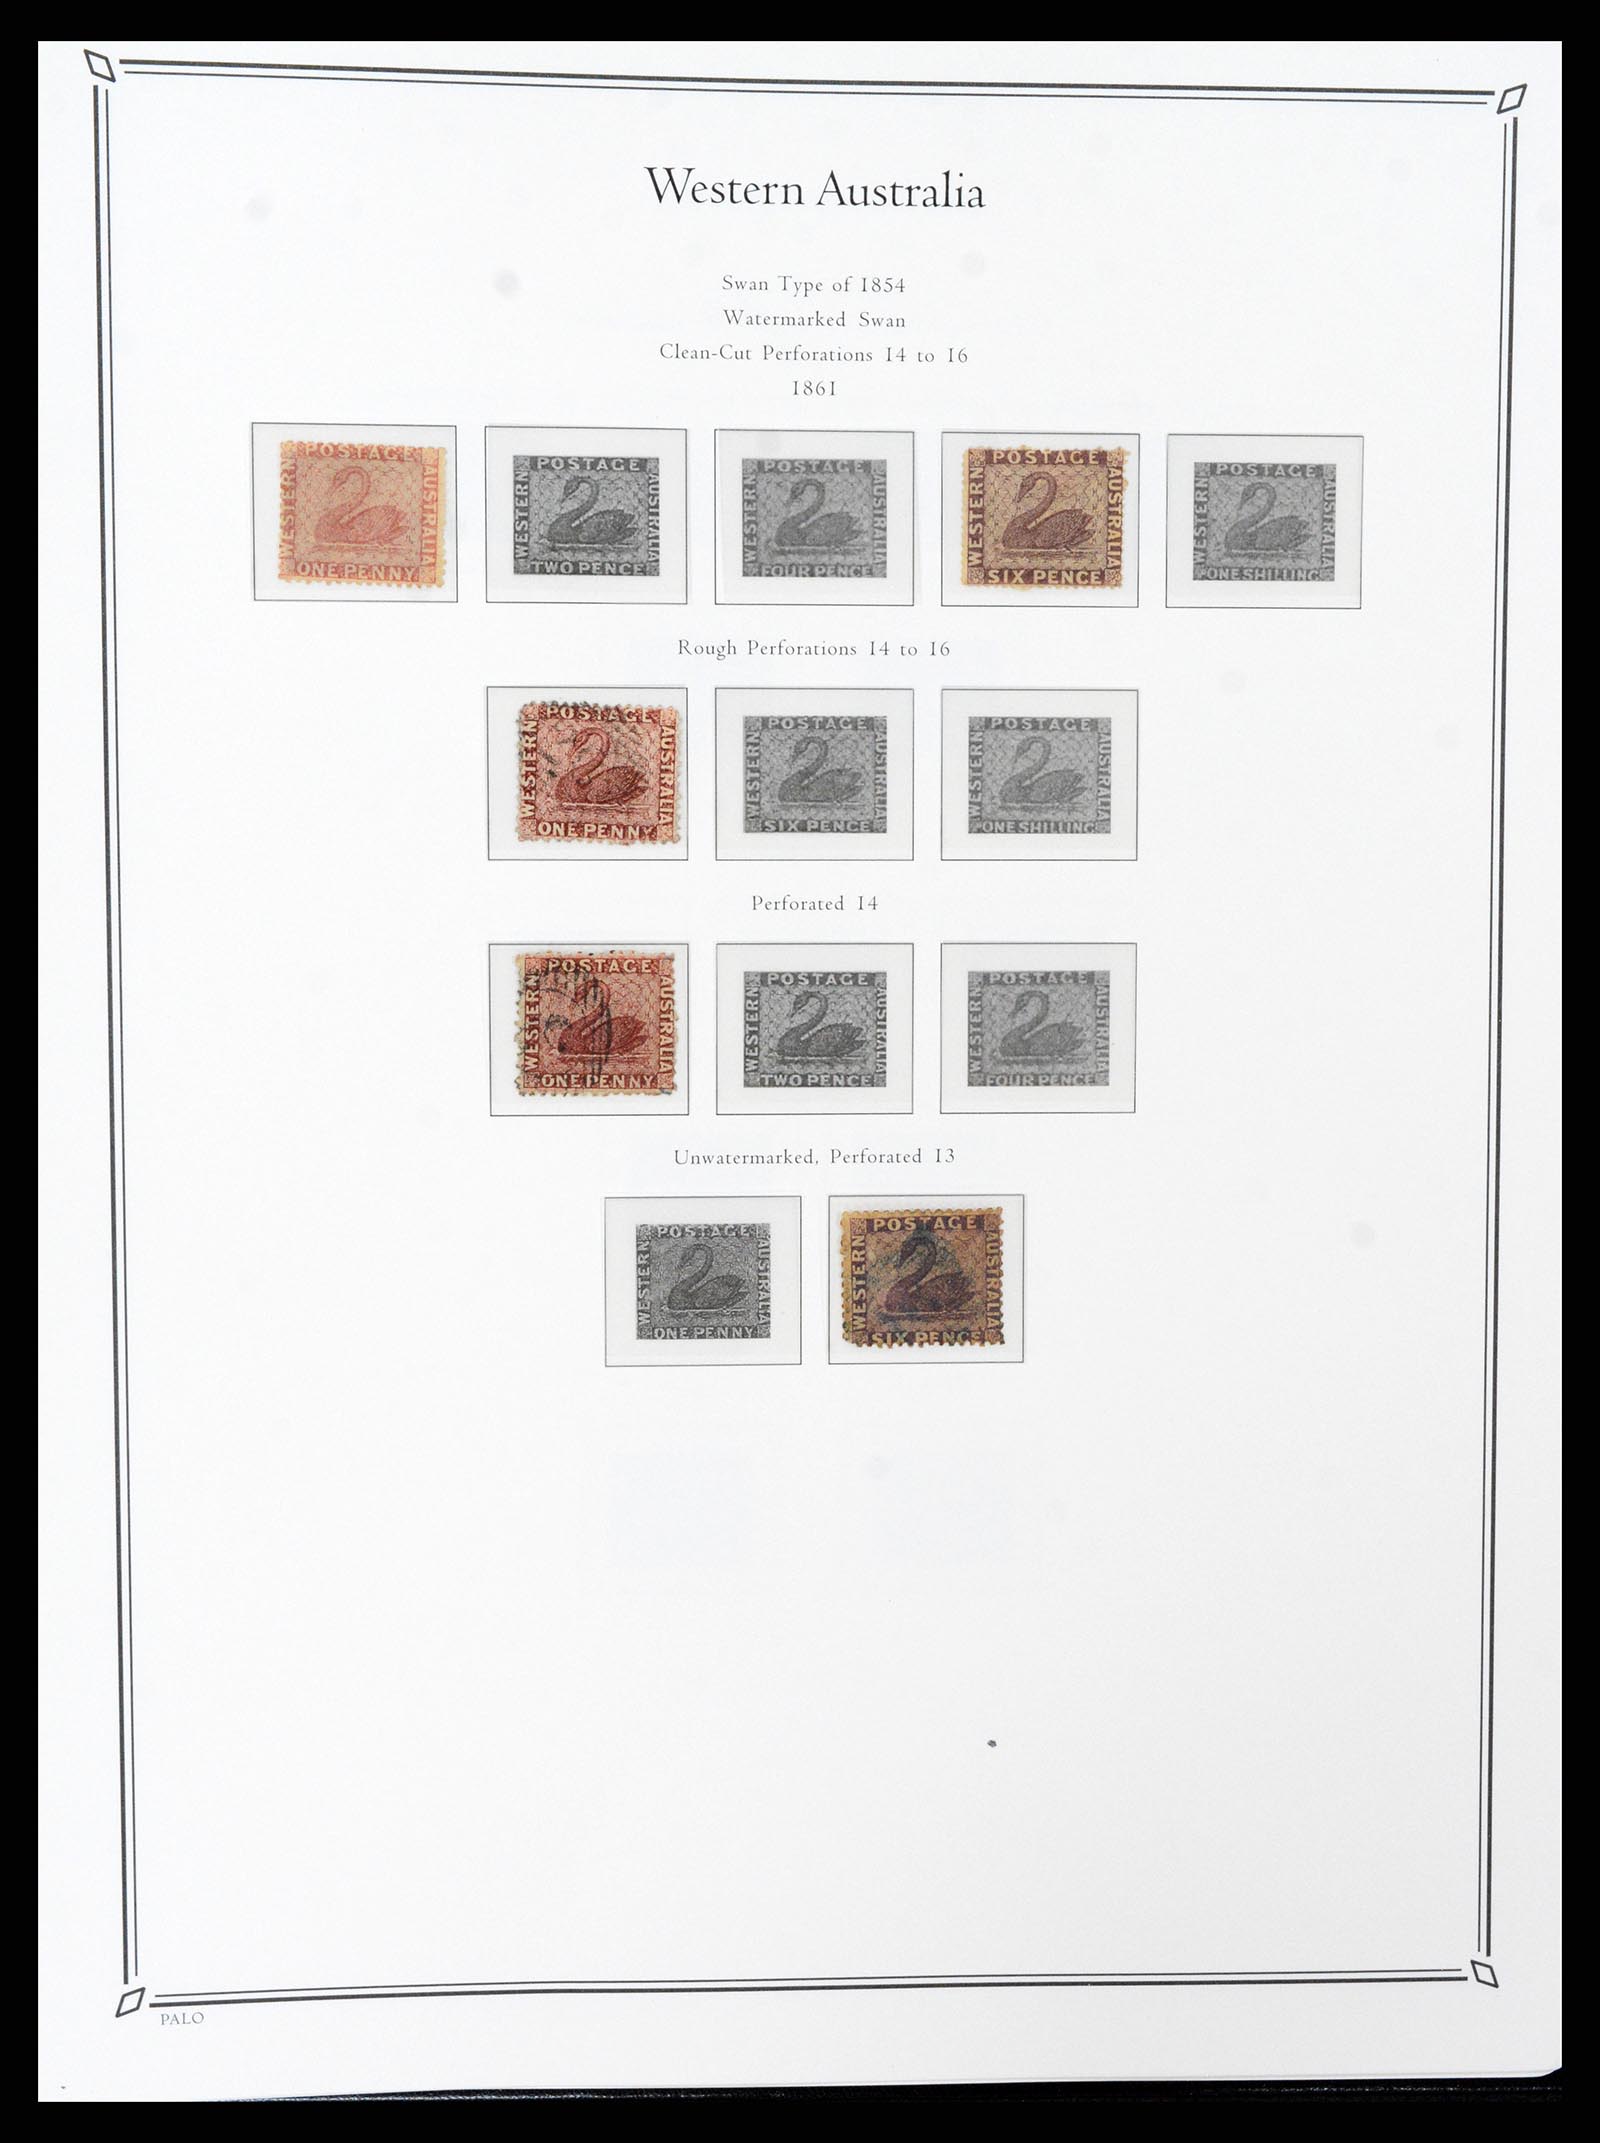 37730 033 - Stamp collection 37730 British colonies in the Pacific 1860-1970.